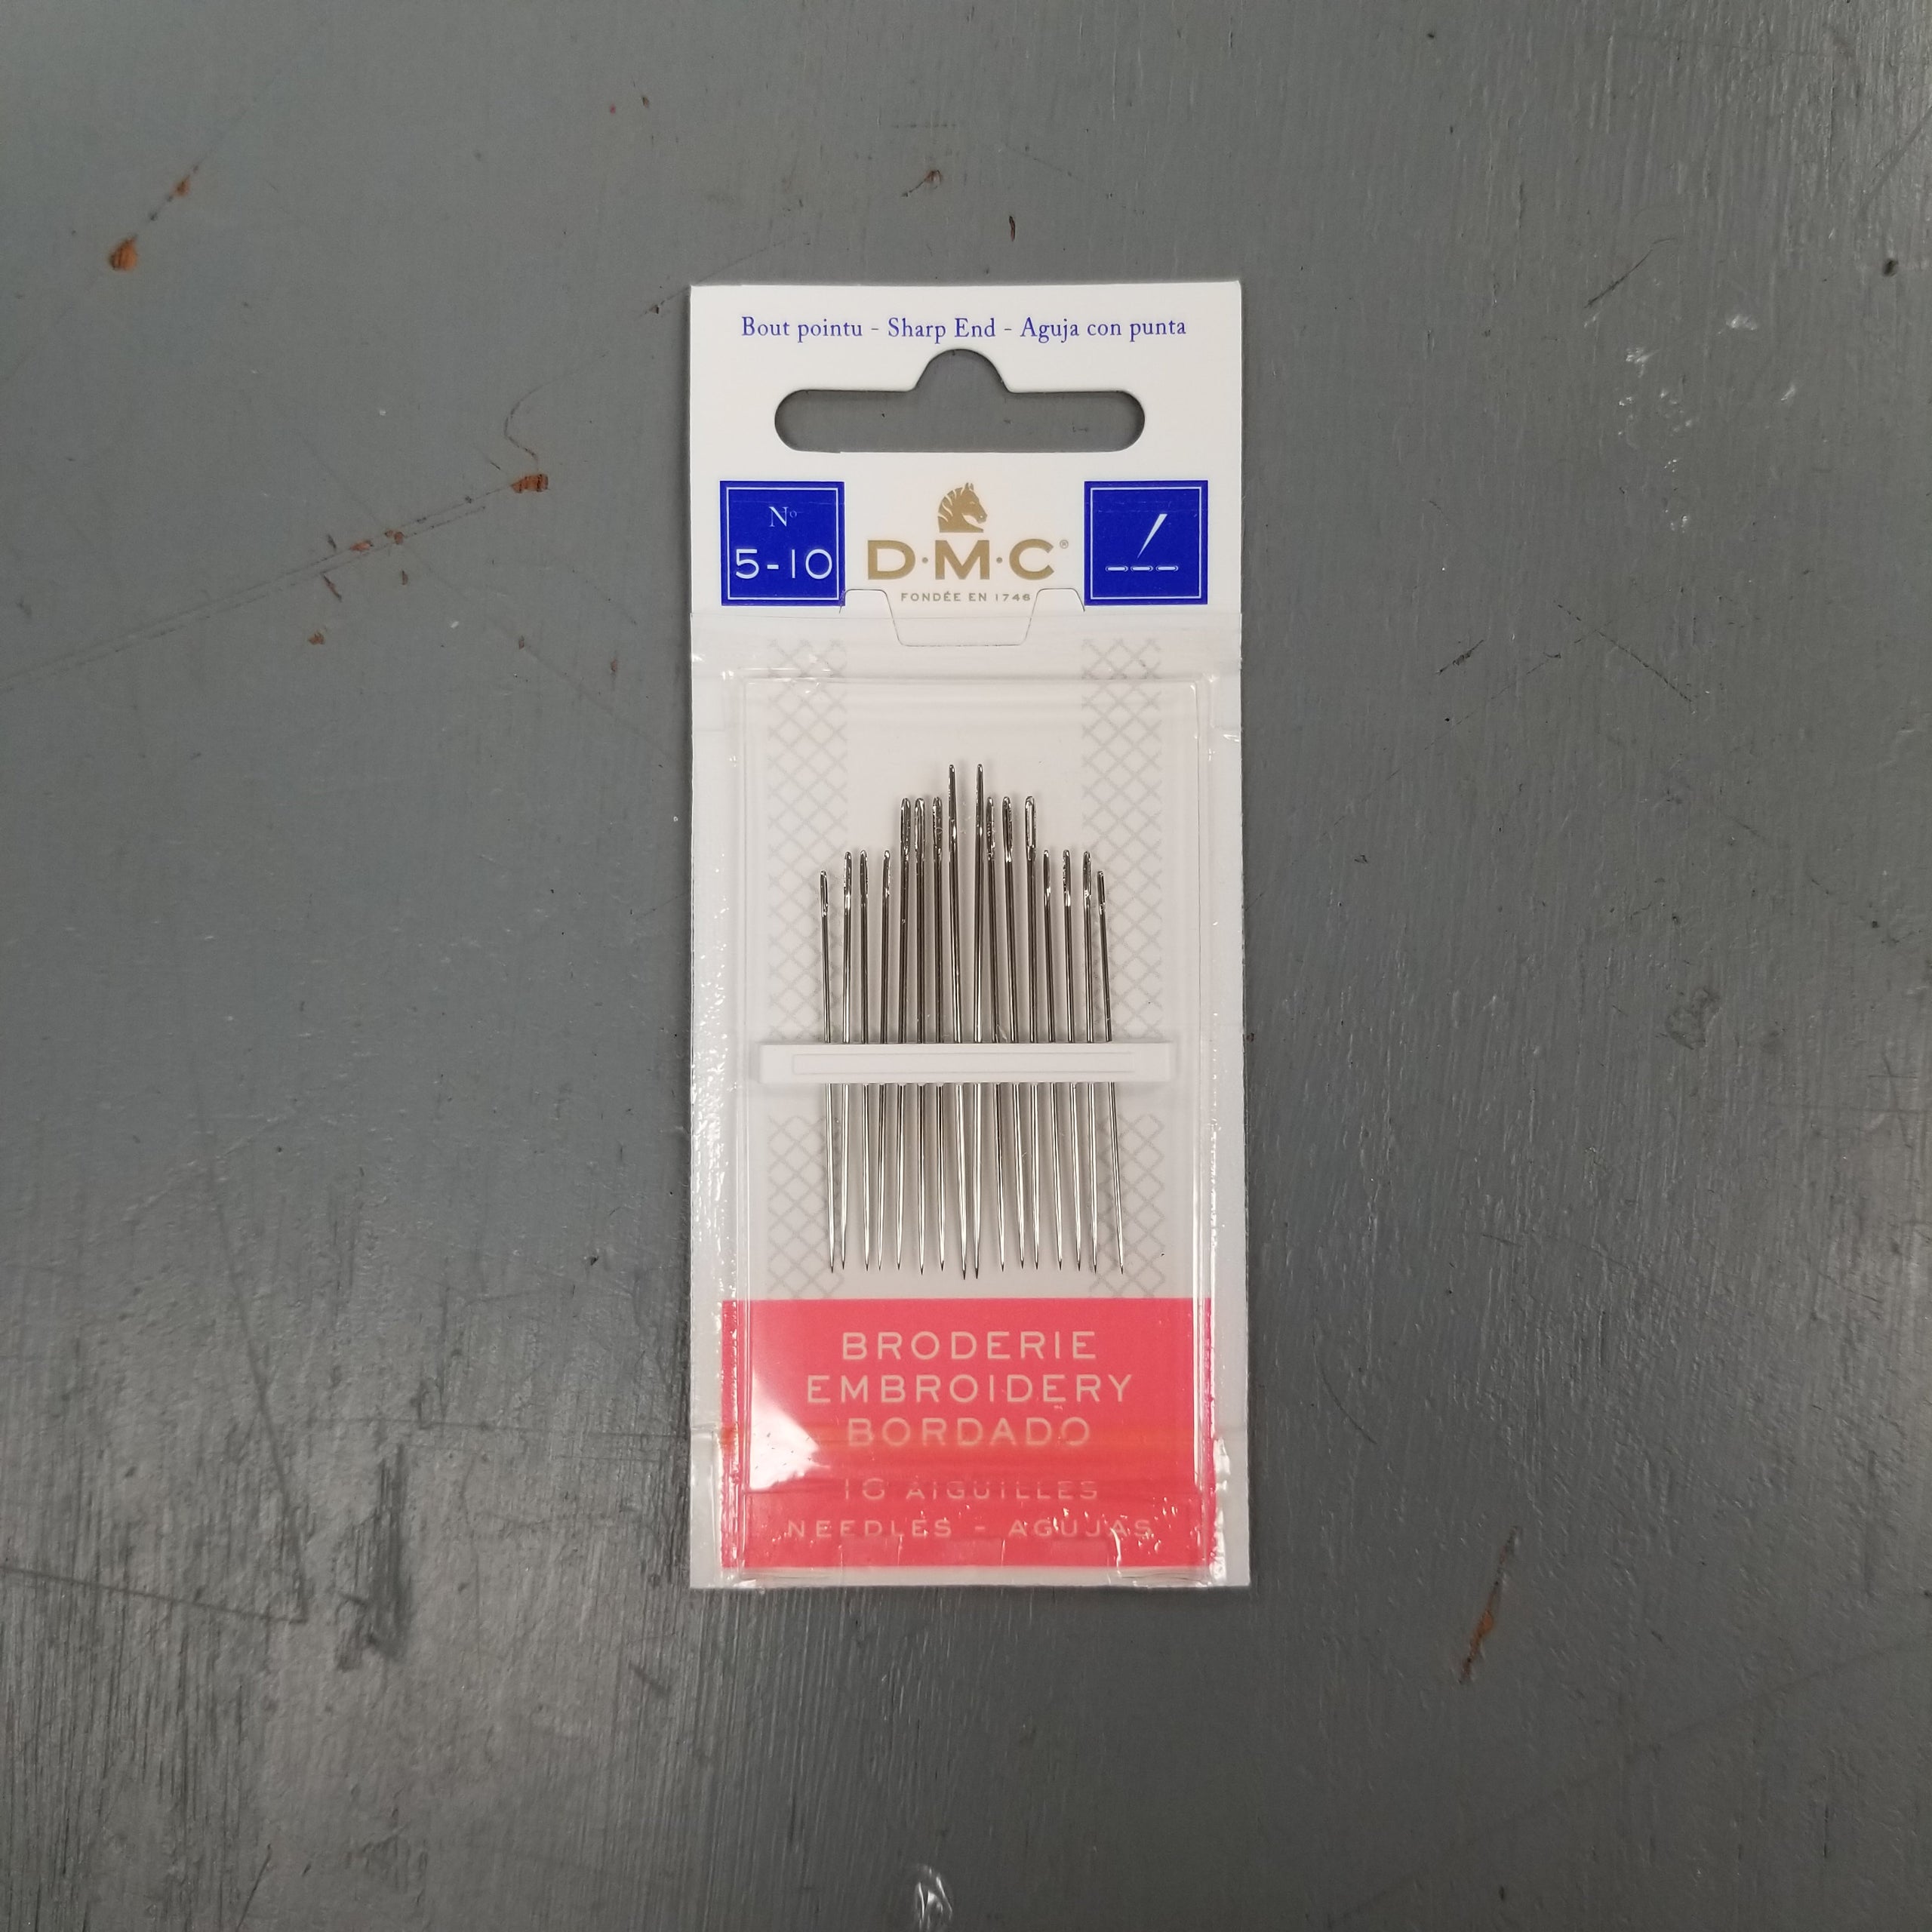 Embroidery Needles, Size 5/10